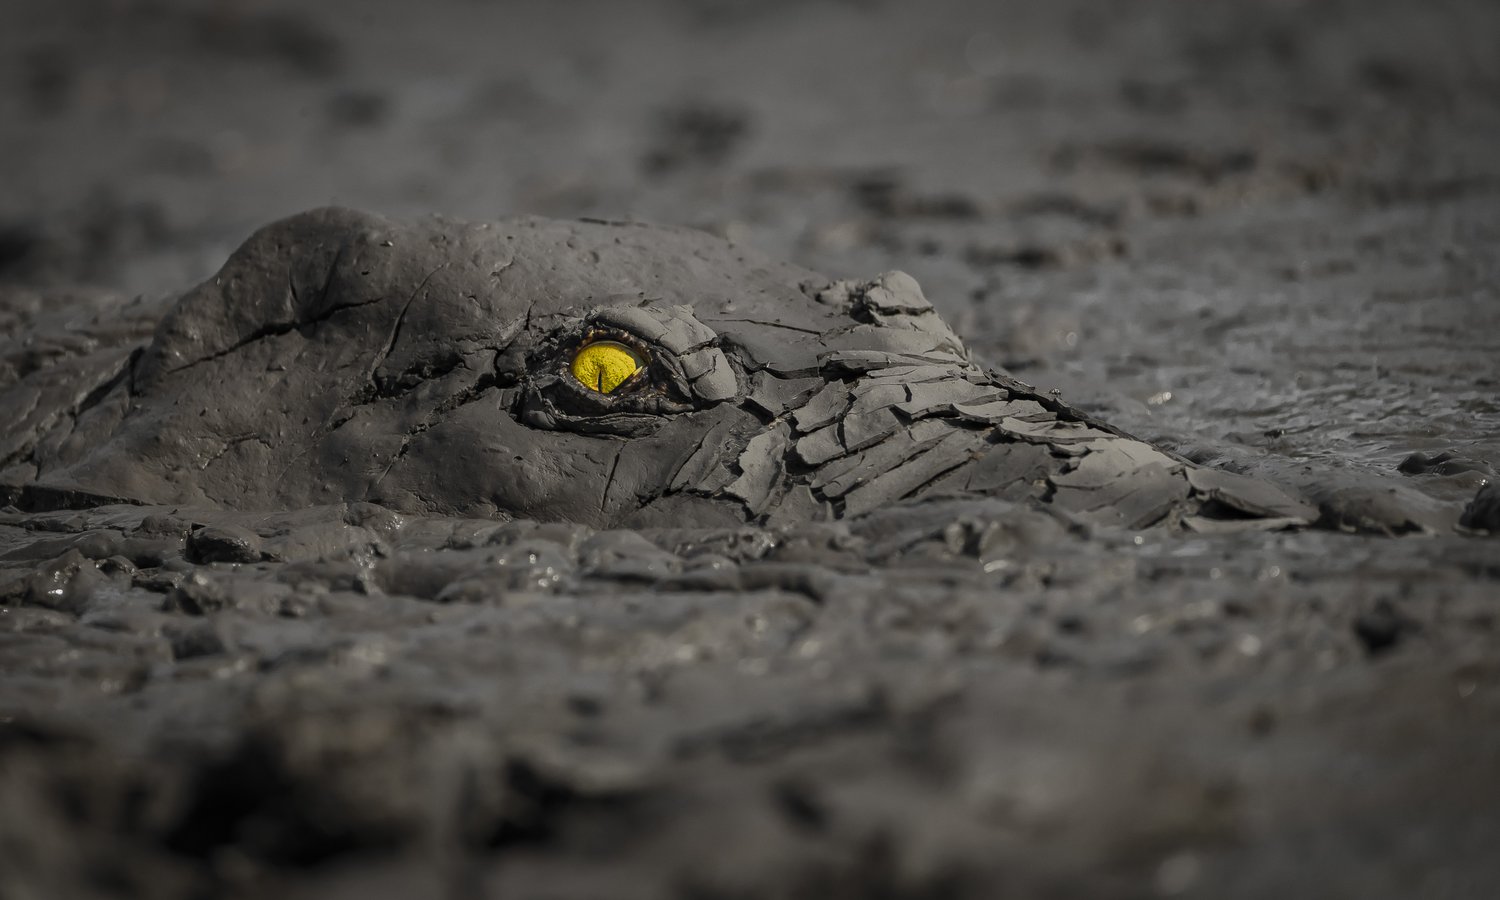 World Nature Photography Awards winners Jens Cullmann's photograph of a crocodile in the mud